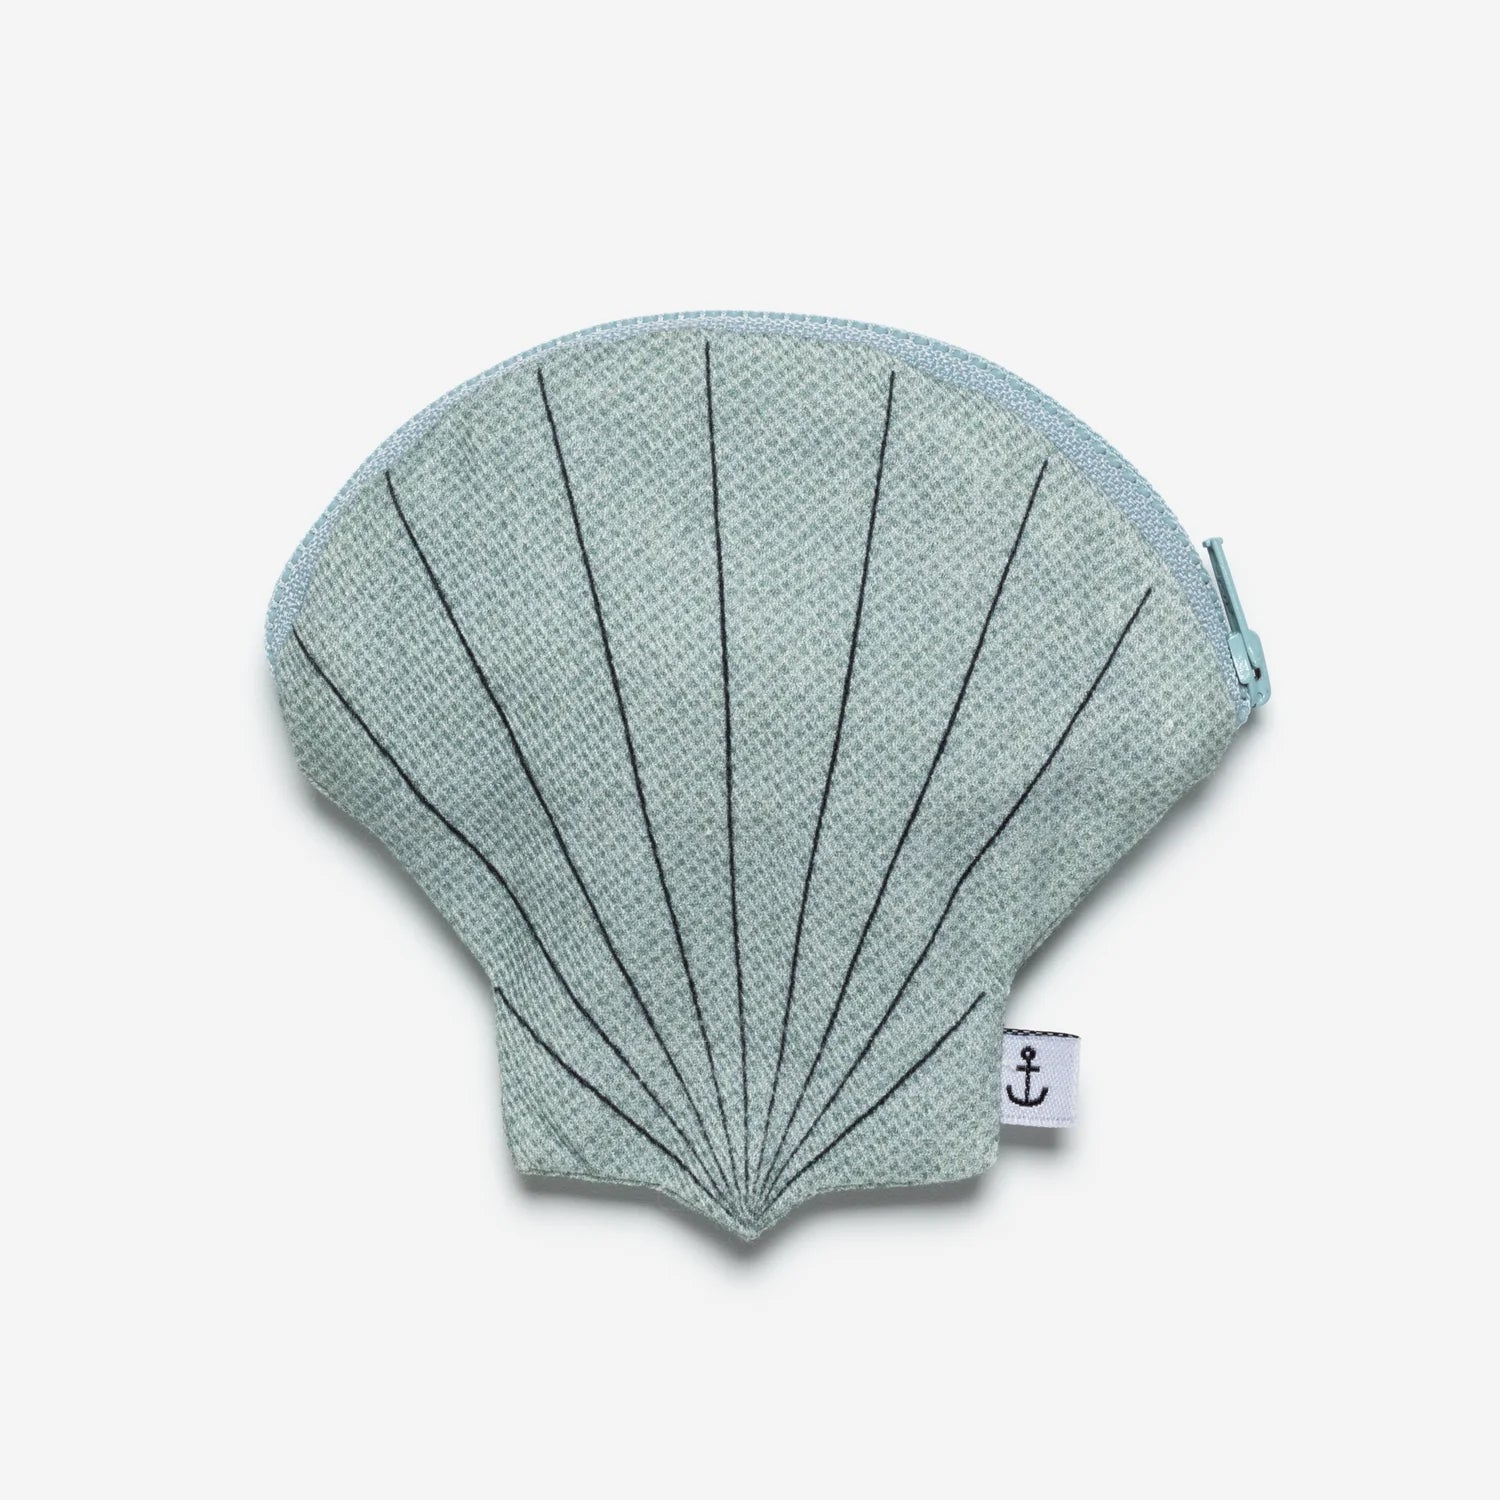 Exterior of oyster shell zippered pouch --- oyster shell is light blue 